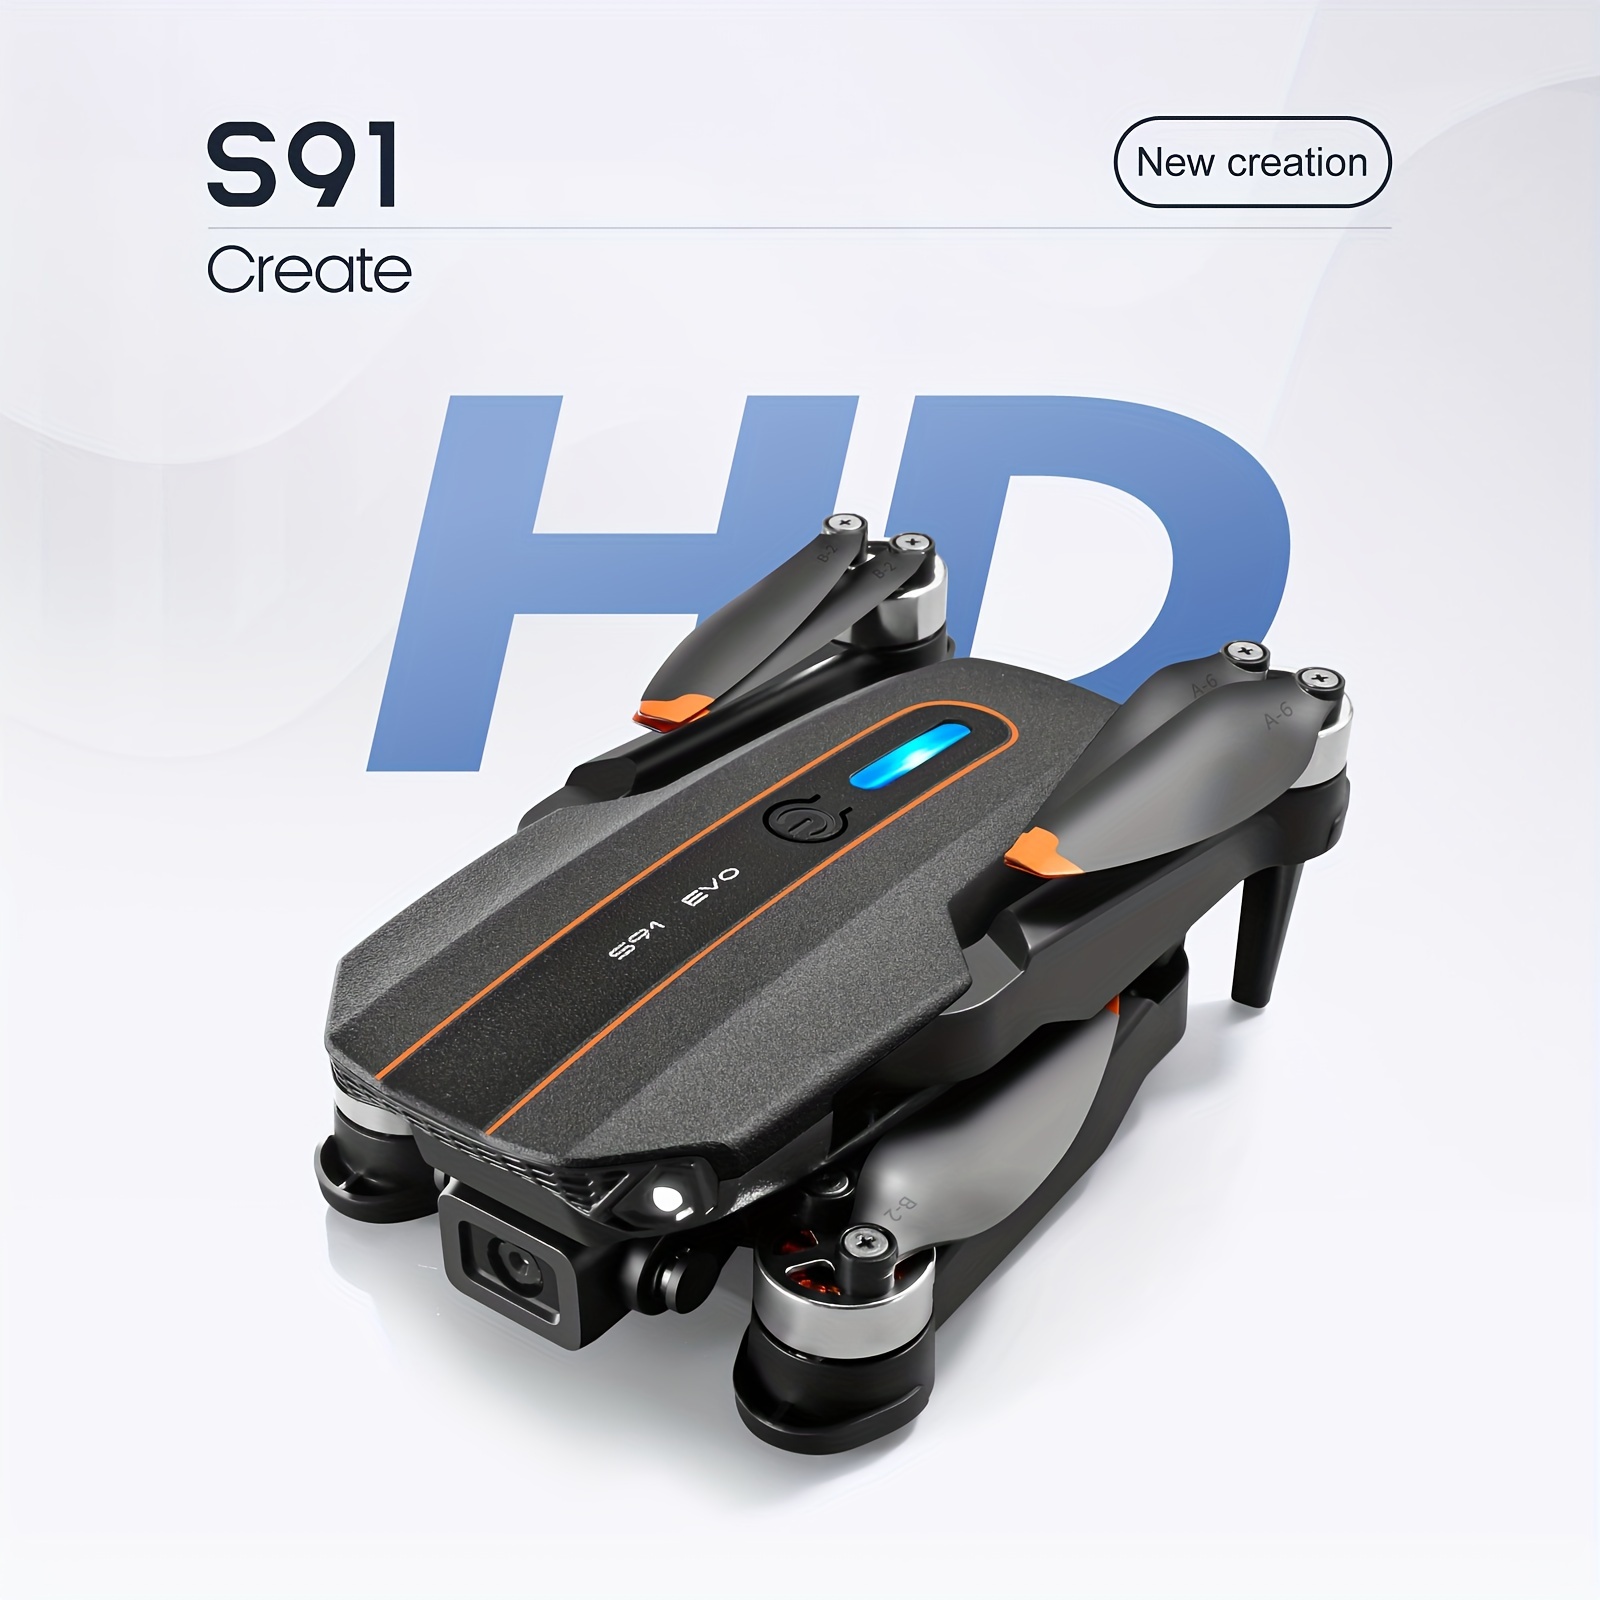 s91 remote remote control drone with hd dual camera adjustable headless mode track flying one key surround smart follow brushless motor drone self with optical flow positioning function details 3